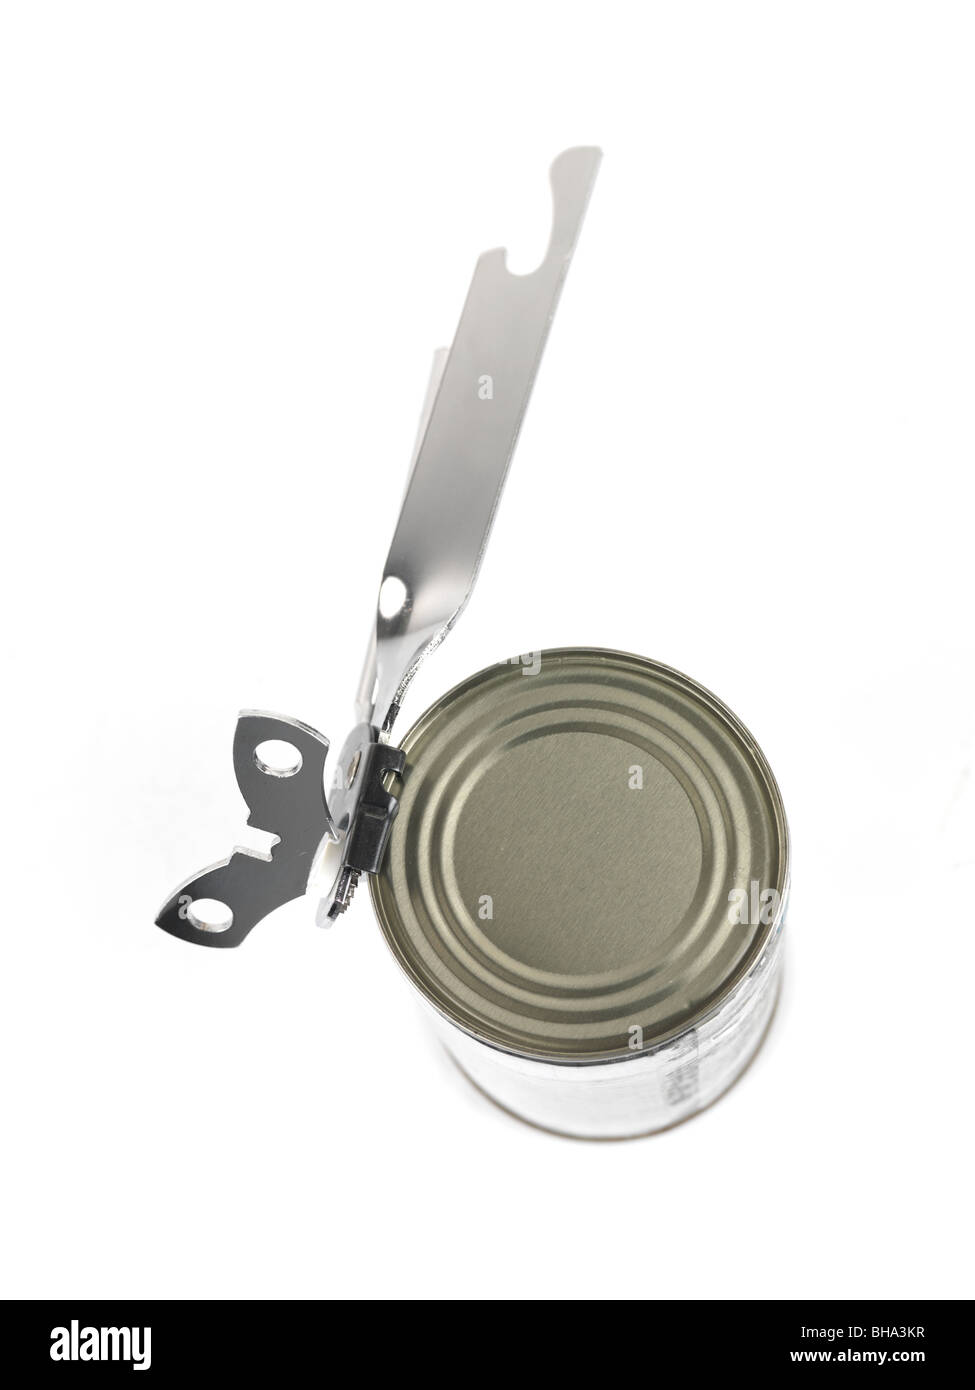 https://c8.alamy.com/comp/BHA3KR/a-can-opener-and-a-tin-can-isolated-against-a-white-background-BHA3KR.jpg